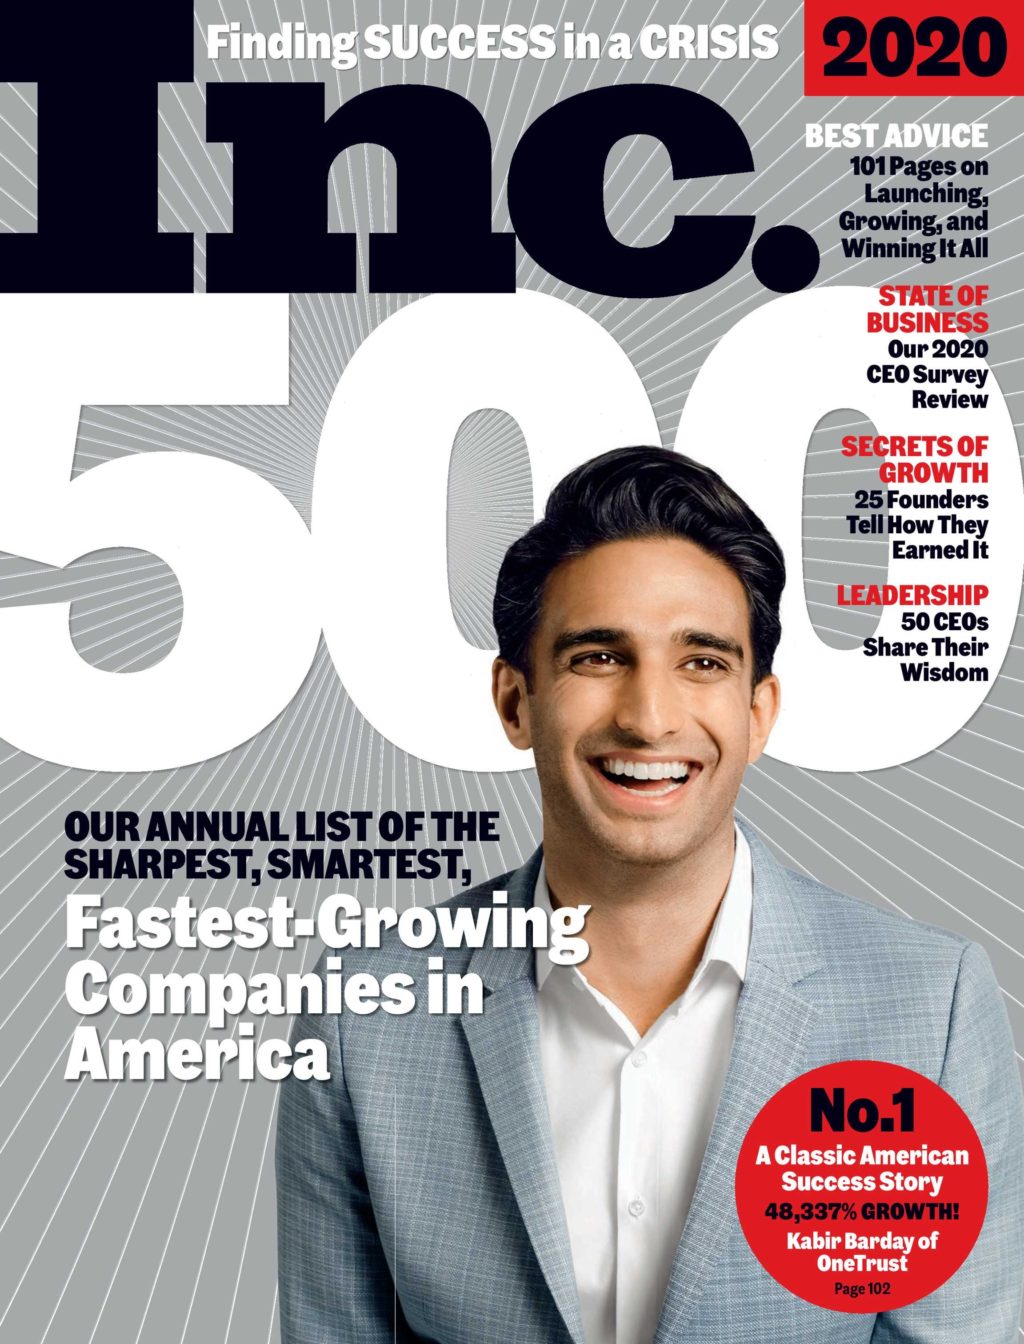 Cariloha Makes Inc. 5000 List of America’s Fastest-Growing Companies